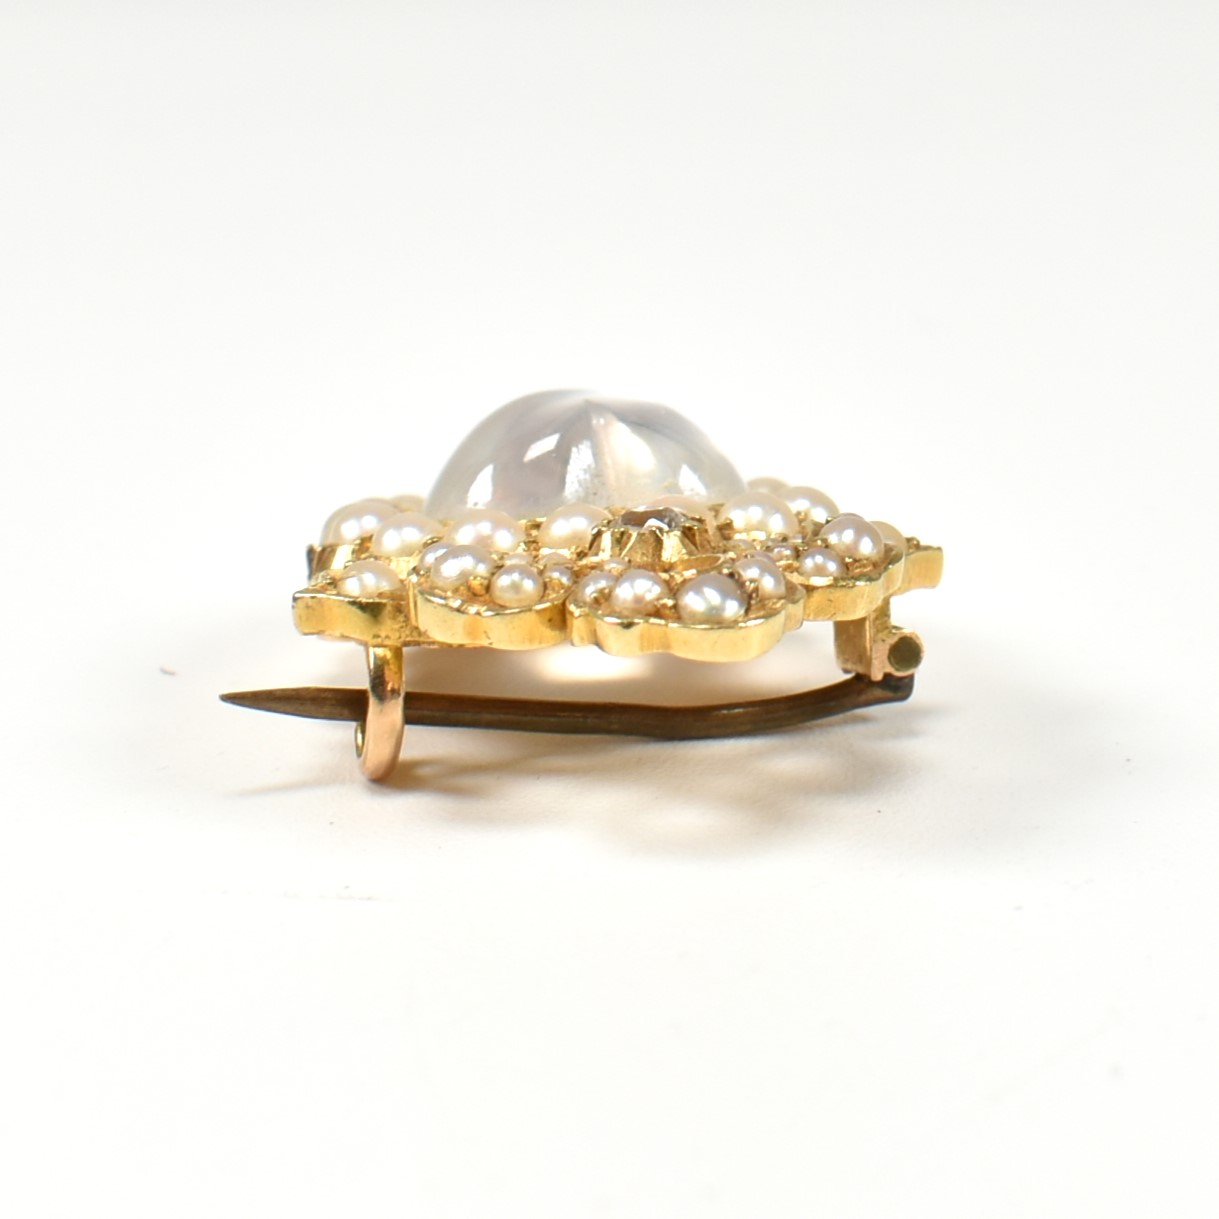 19TH CENTURY GOLD MOONSTONE & PEARL HEART BROOCH PIN - Image 7 of 7